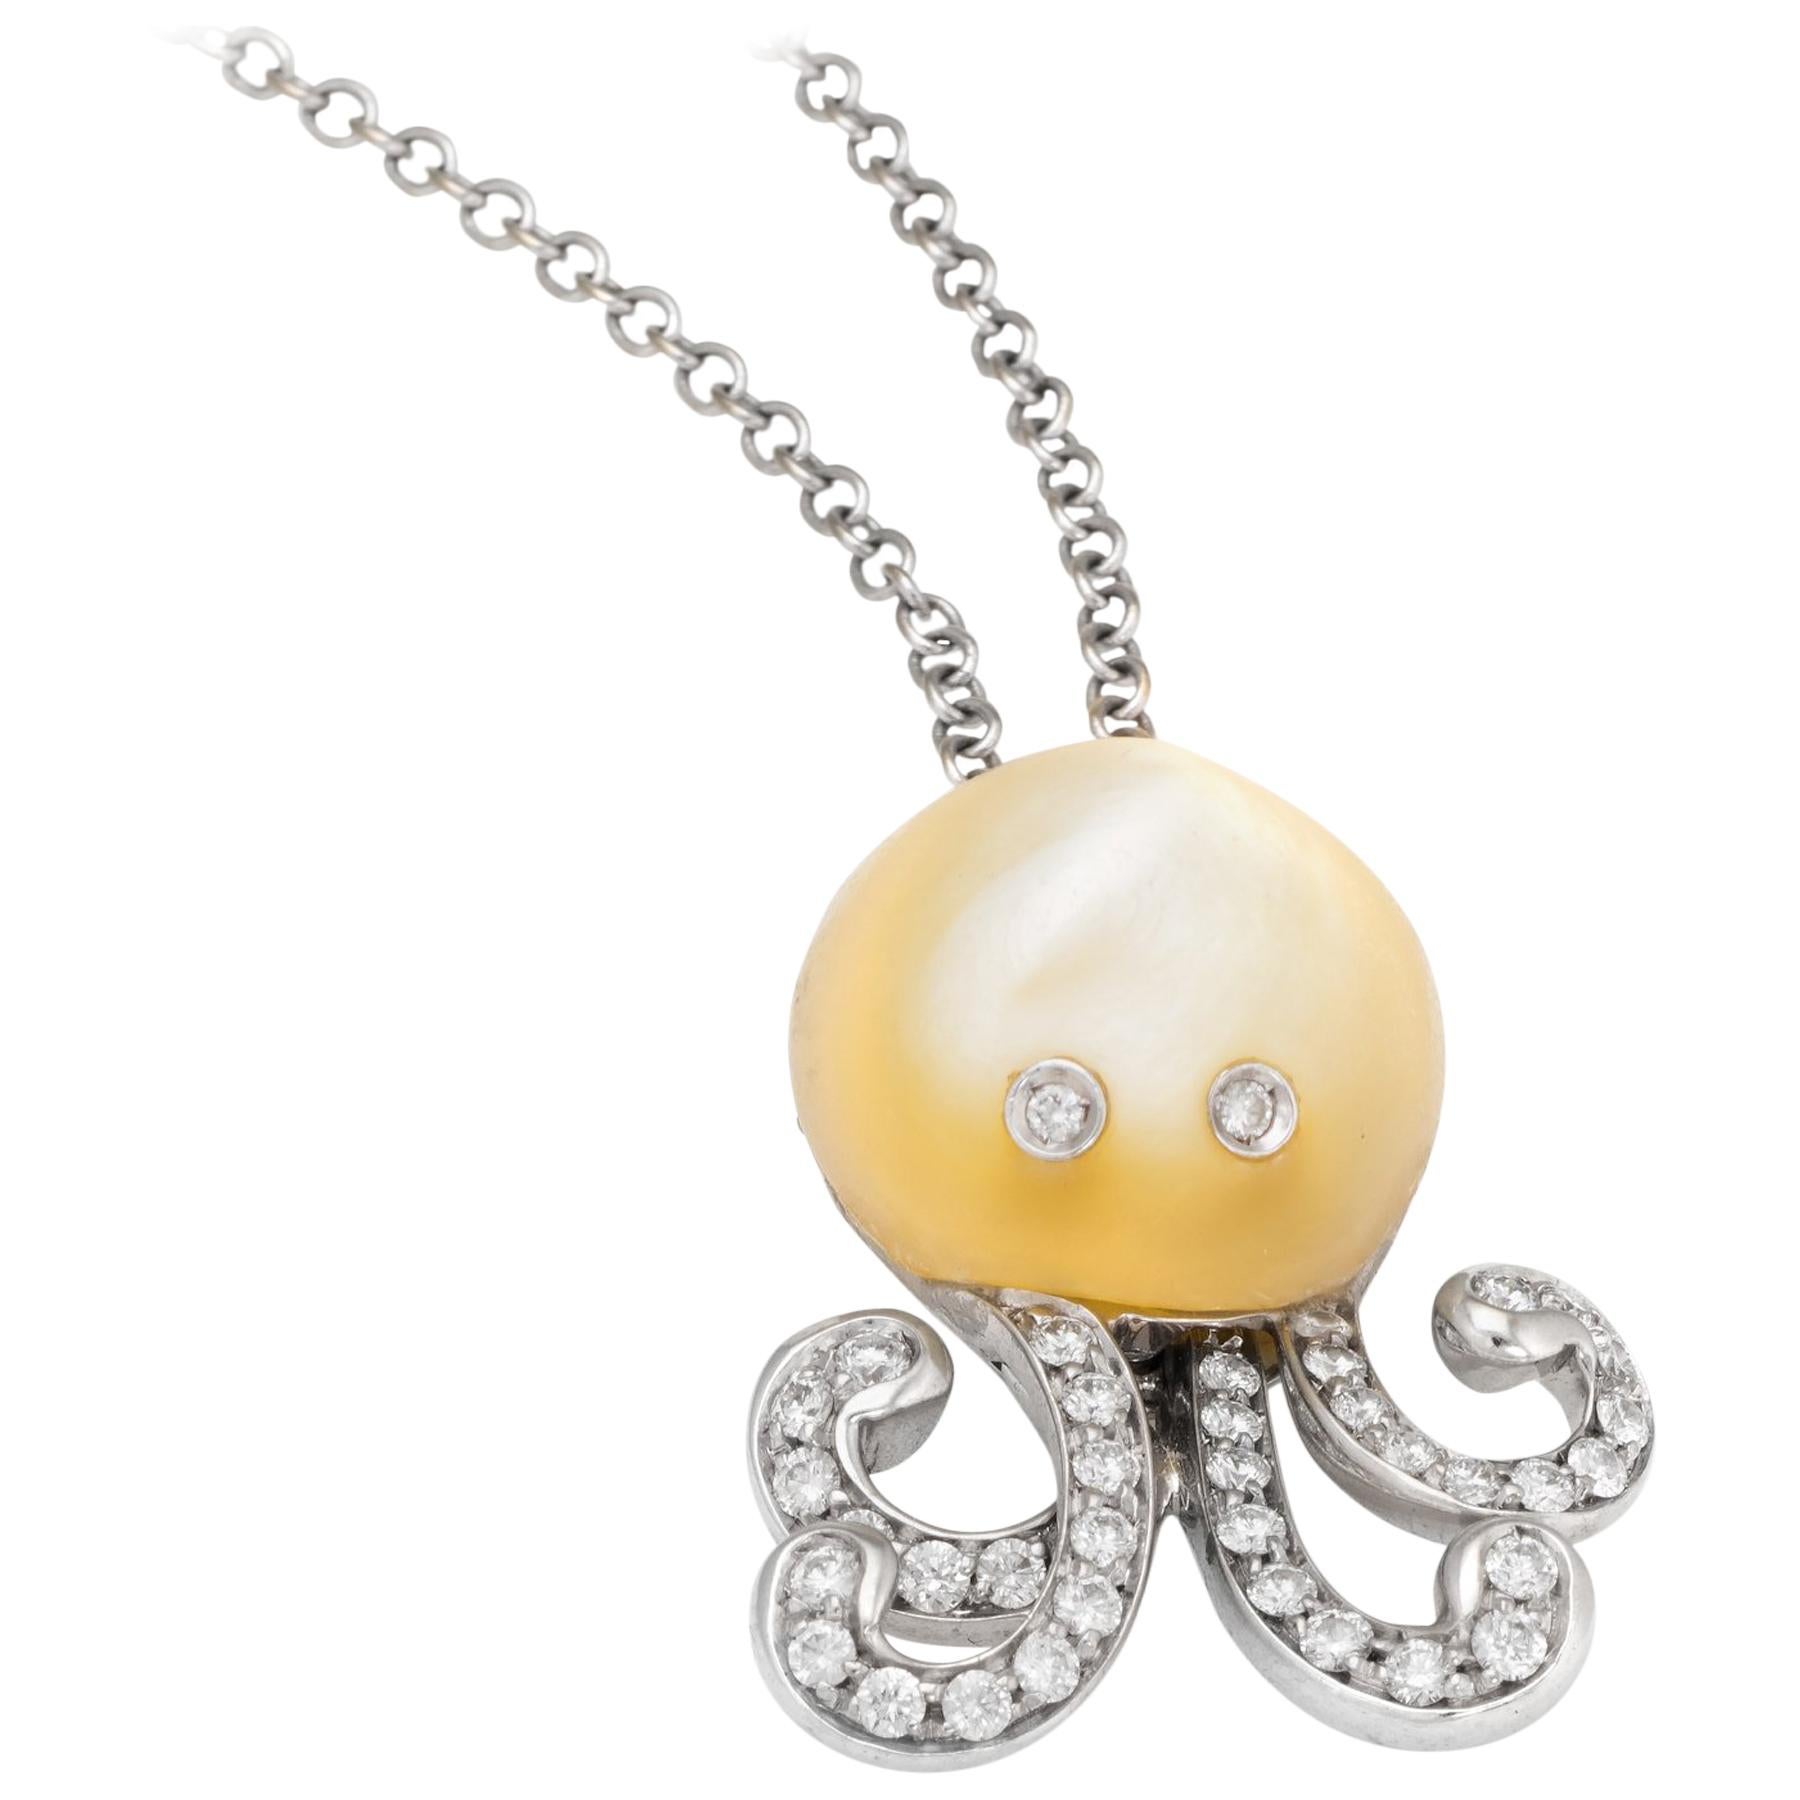 Vintage Octopus Necklace Diamond Mother of Pearl 18 Karat Gold Estate Jewelry